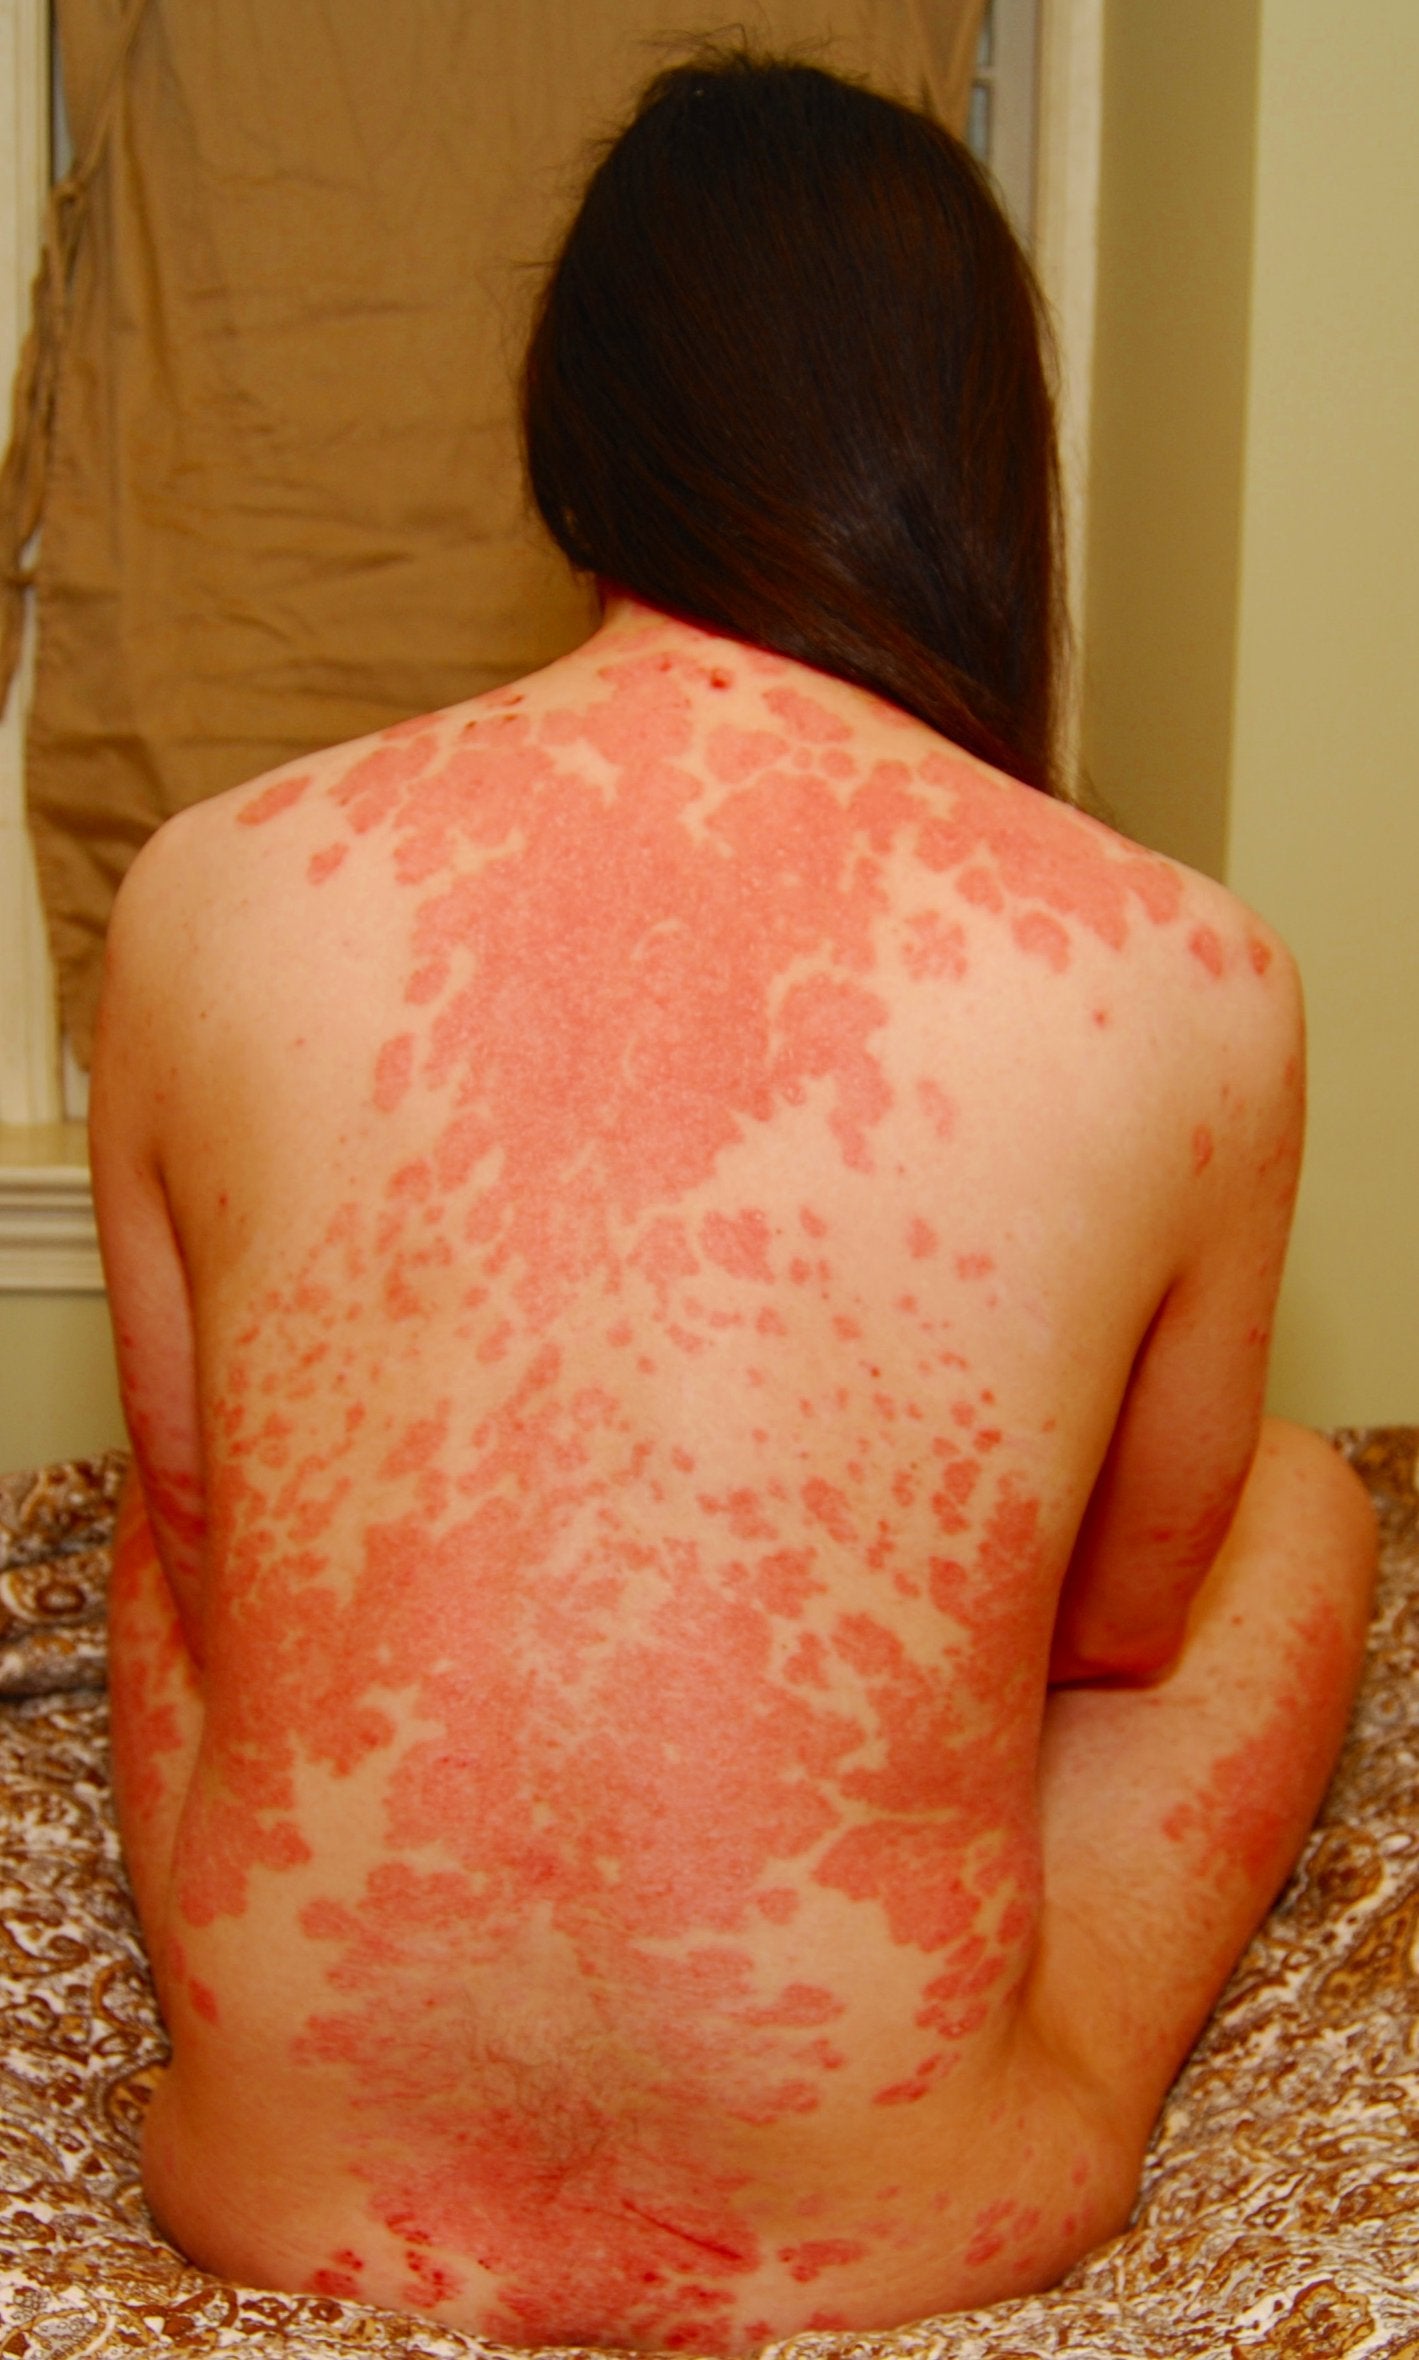 Dear reddit, I have severe psoriasis over almost 90% of my body. It